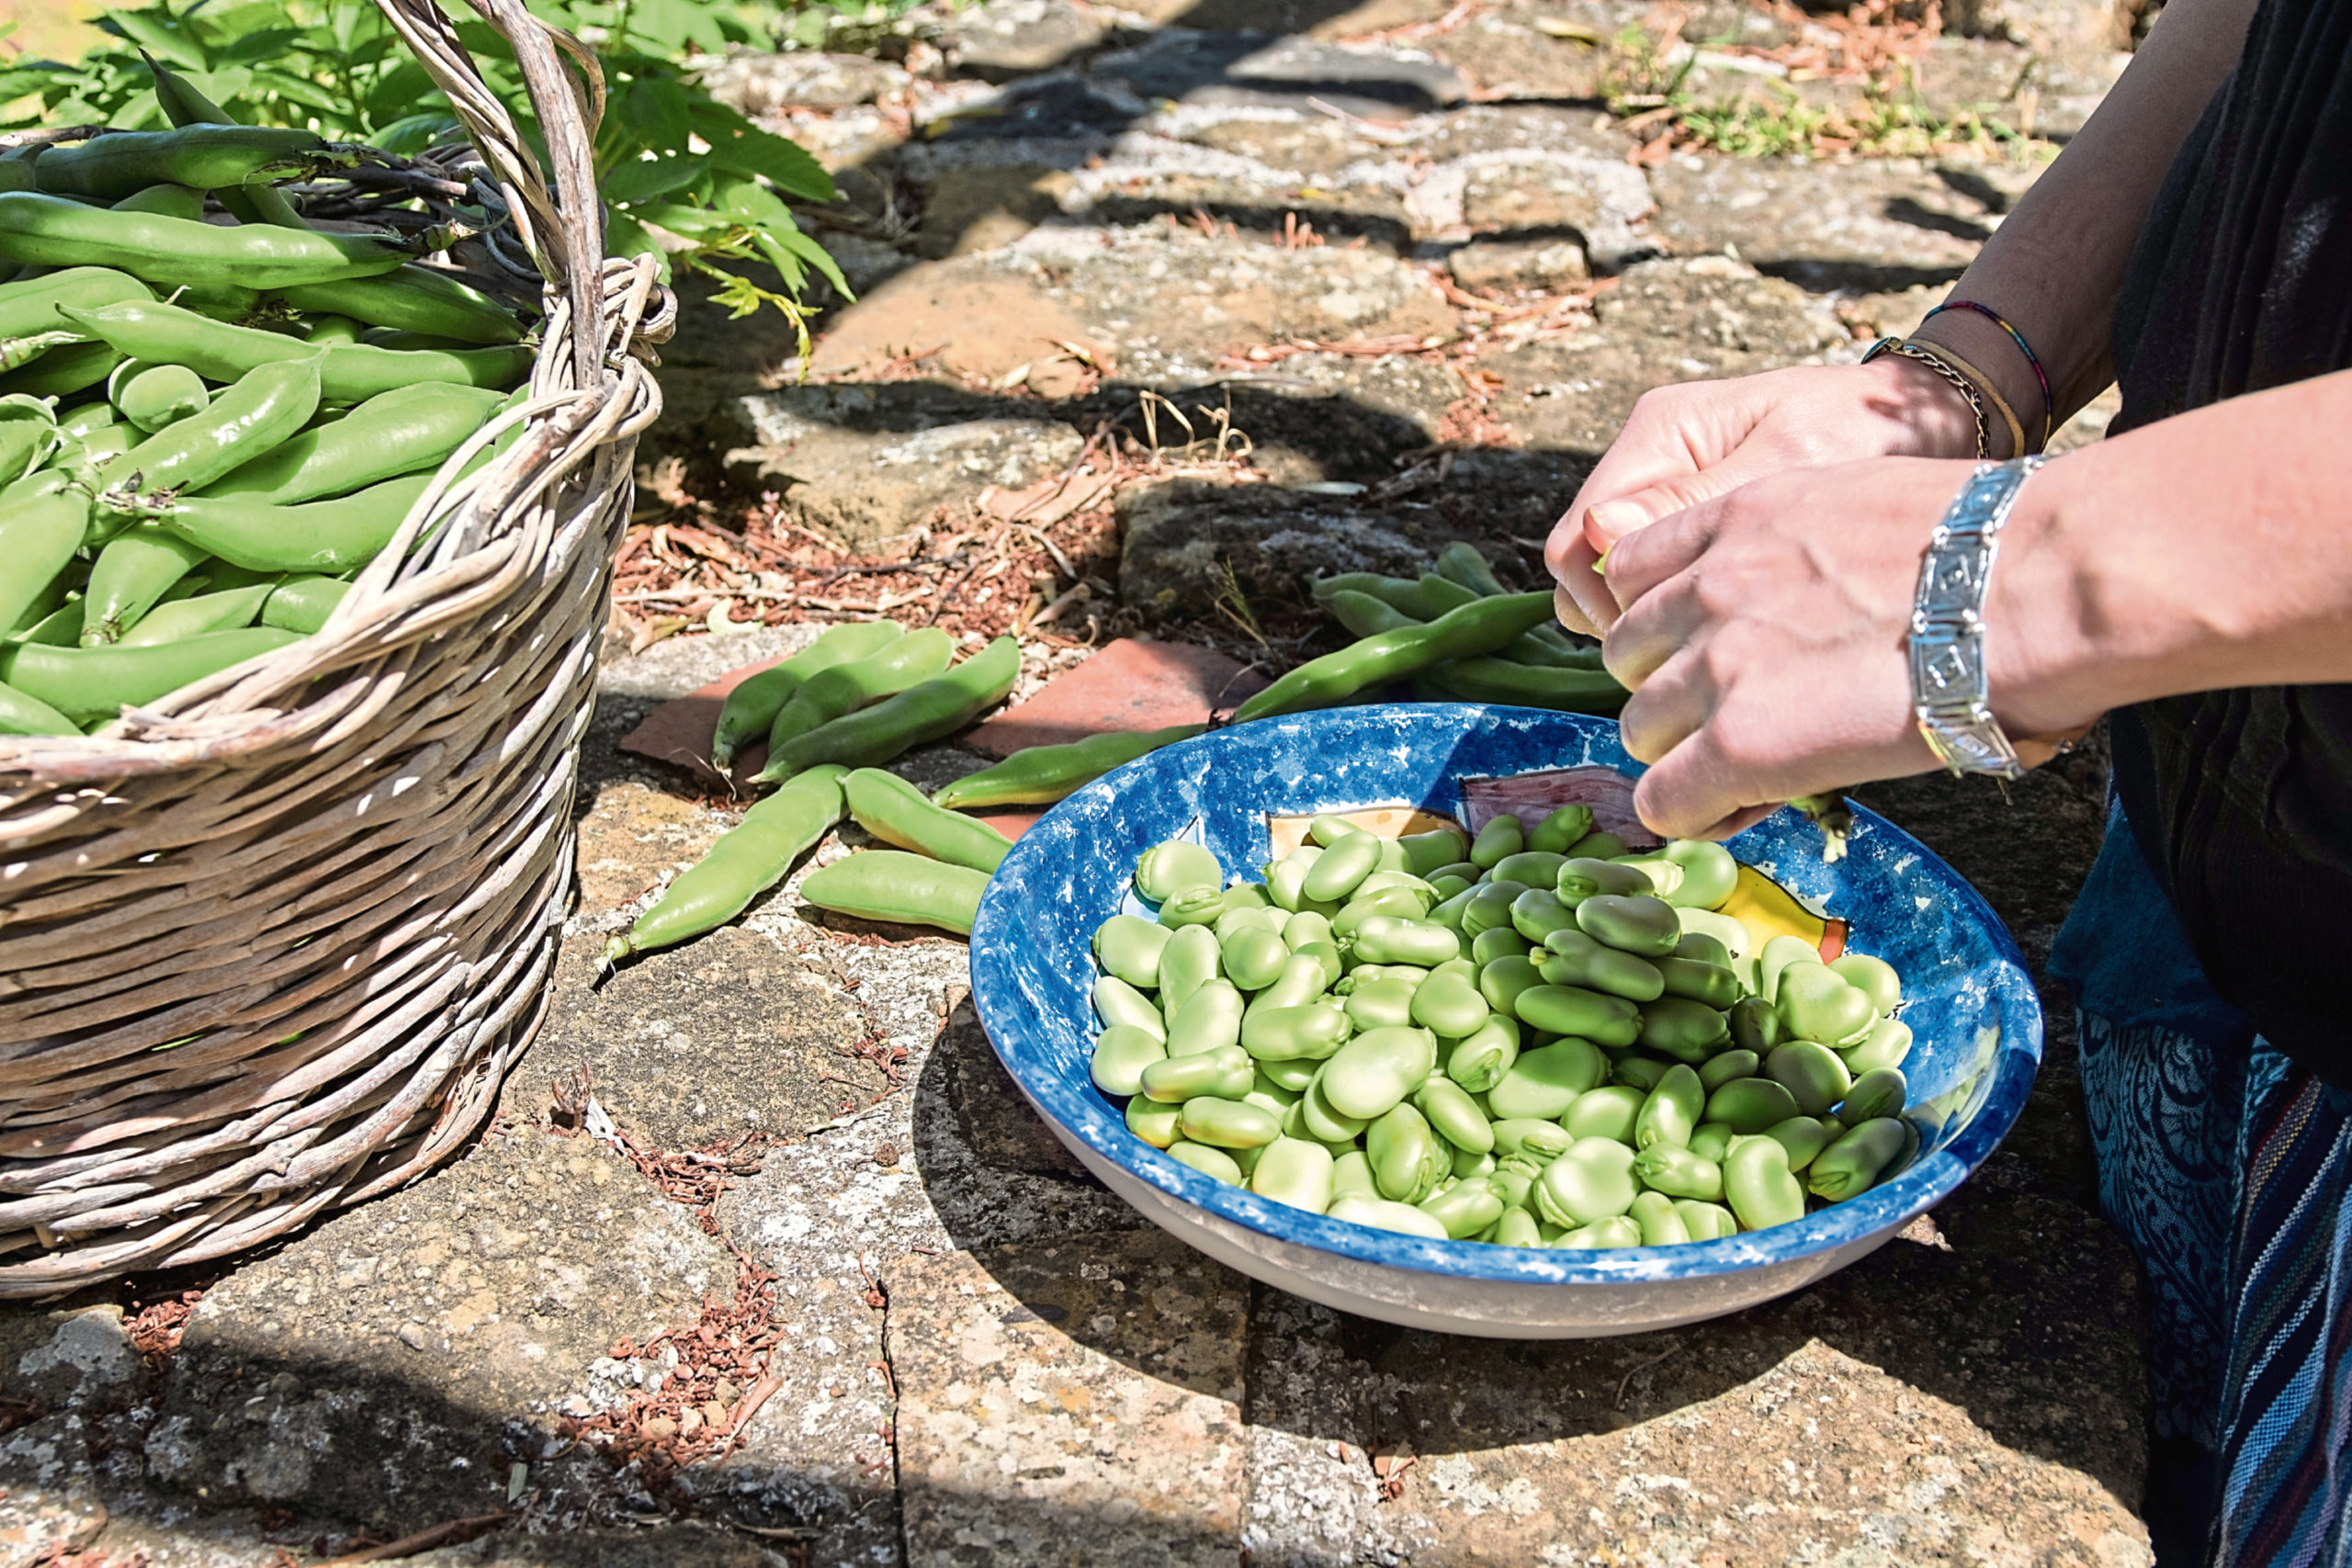 Broad beans are easy to grow – and they are delicious